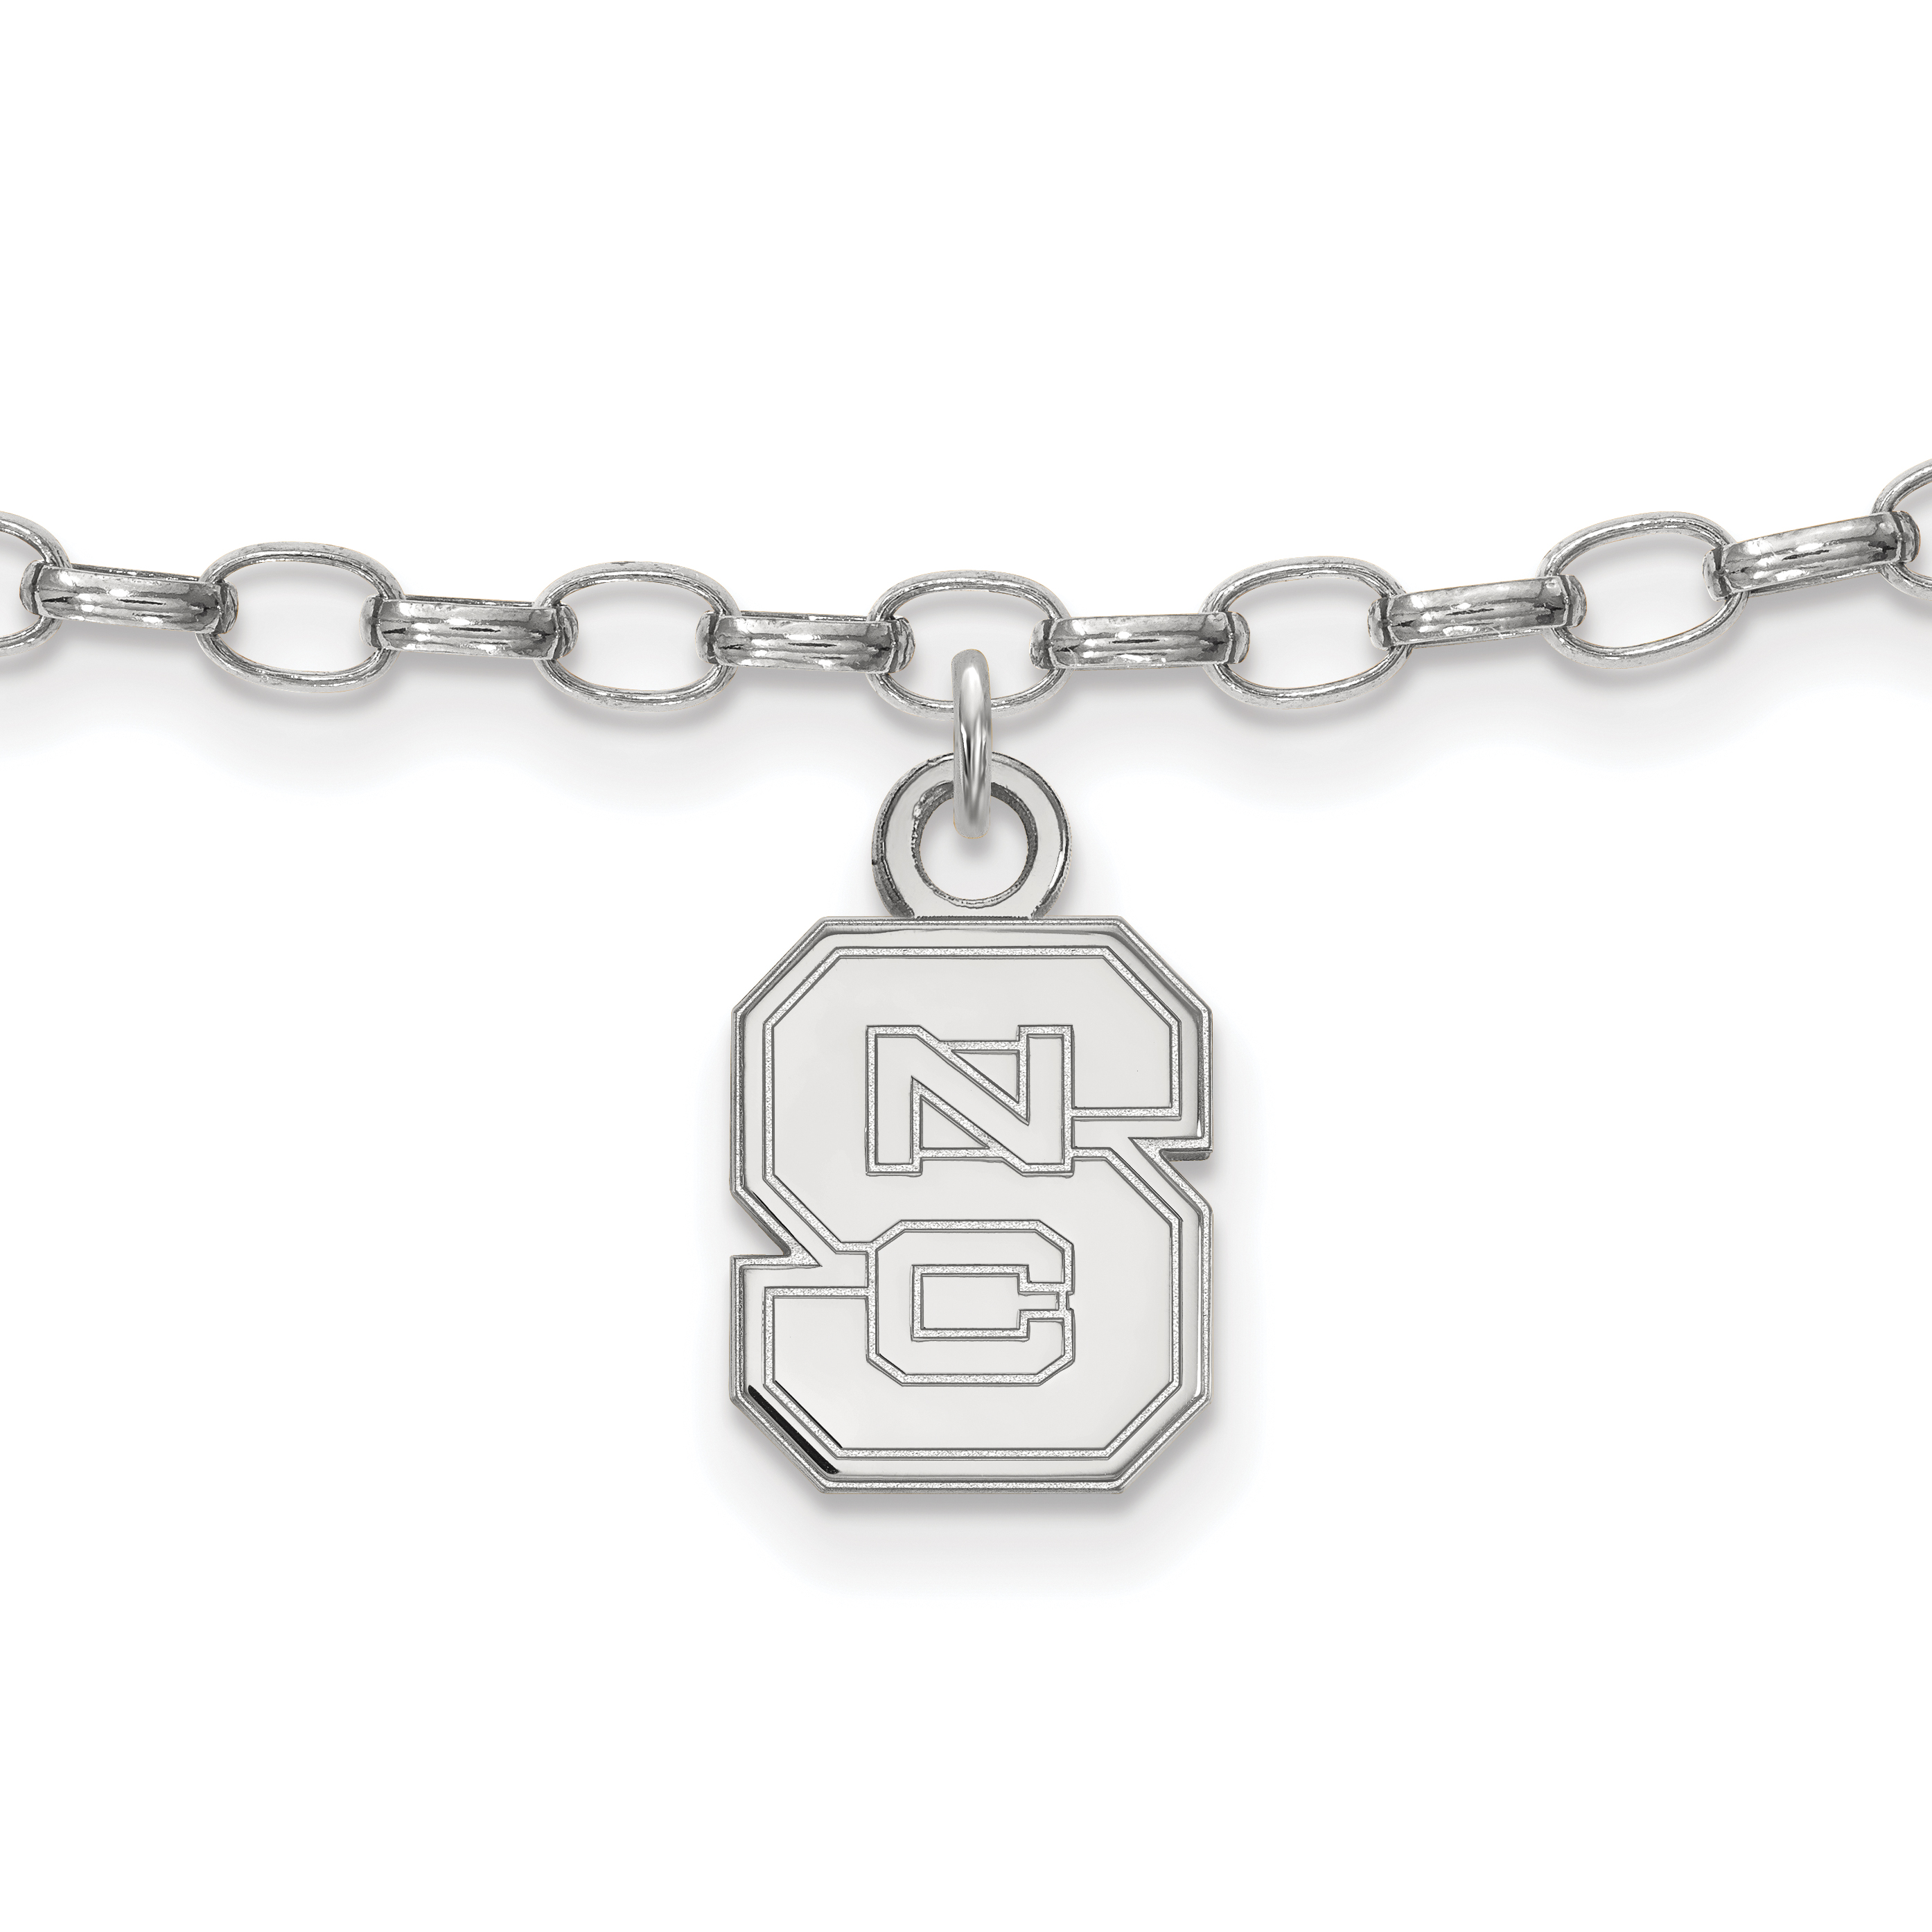 LogoArt Sterling Silver Rhodium-plated North Carolina State University Anklet - image 1 of 5